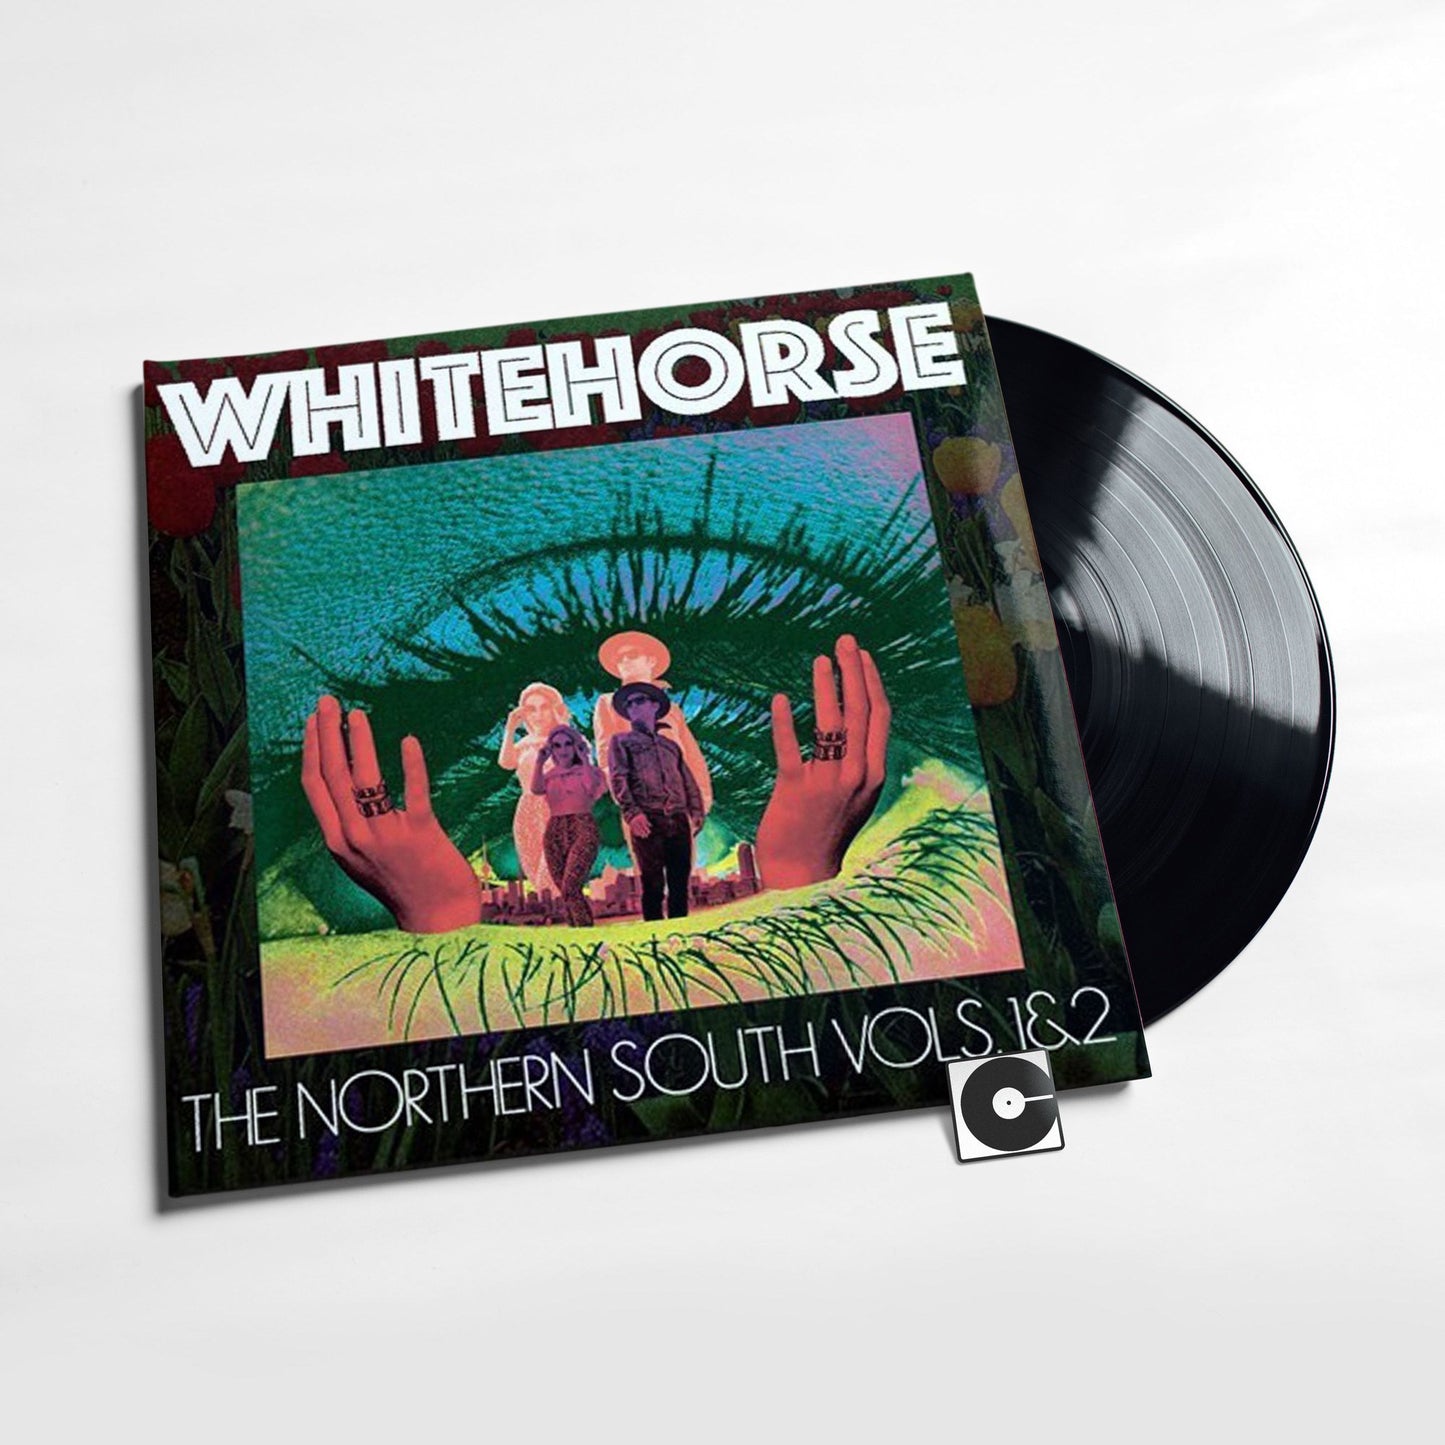 Whitehorse - "The Northern South Vol 1 & 2"